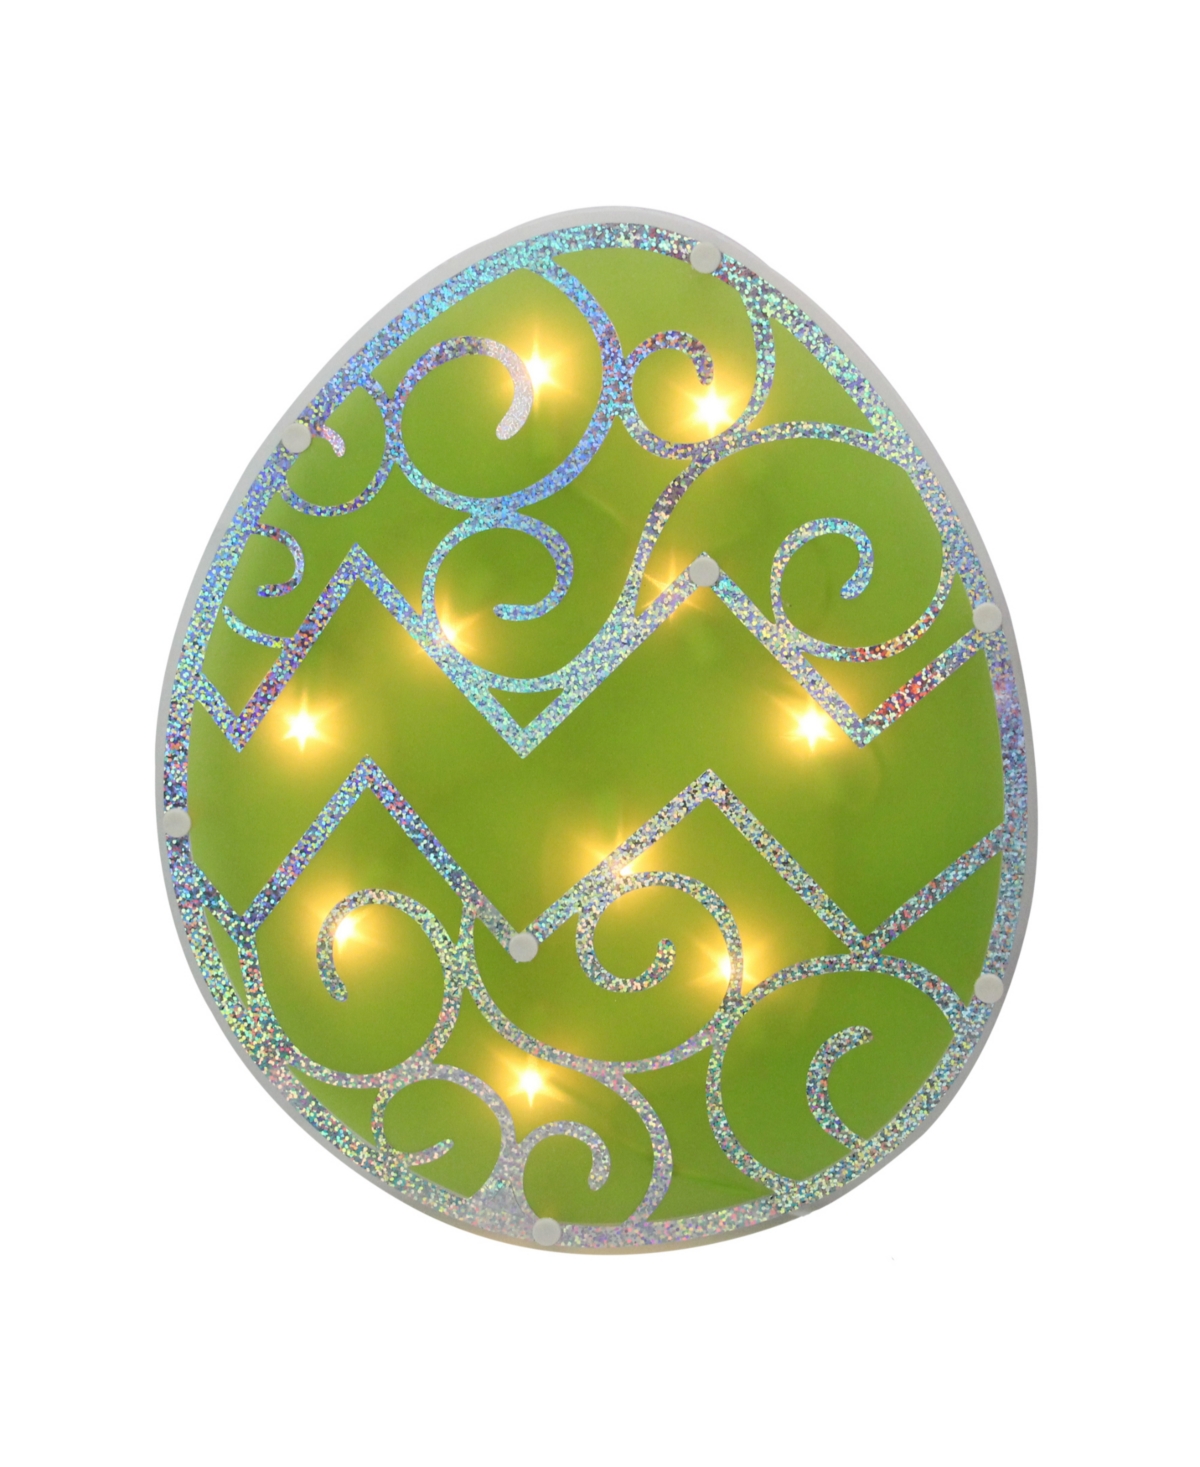 Northlight 12" Lighted Easter Egg Window Silhouette Decoration In Green